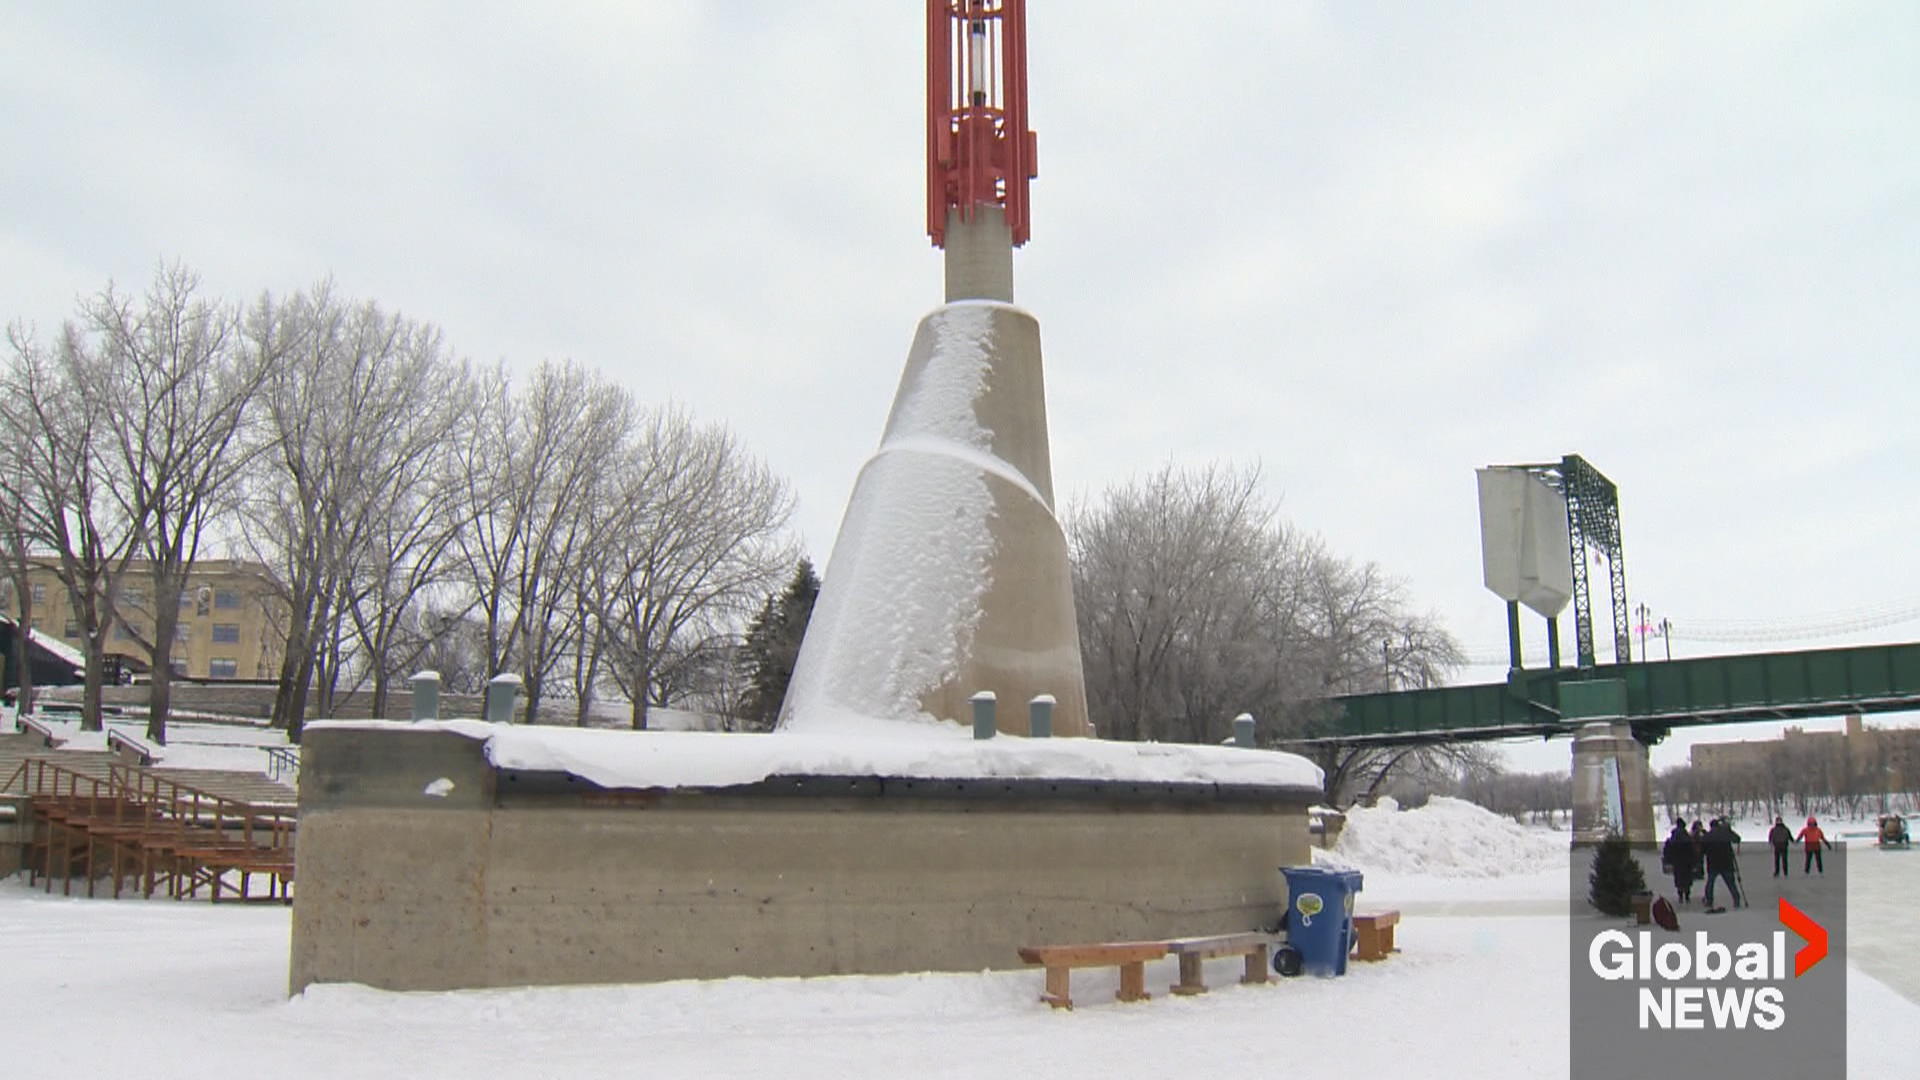 Warm weather forcing adaptations in Winnipeg’s winter tourism